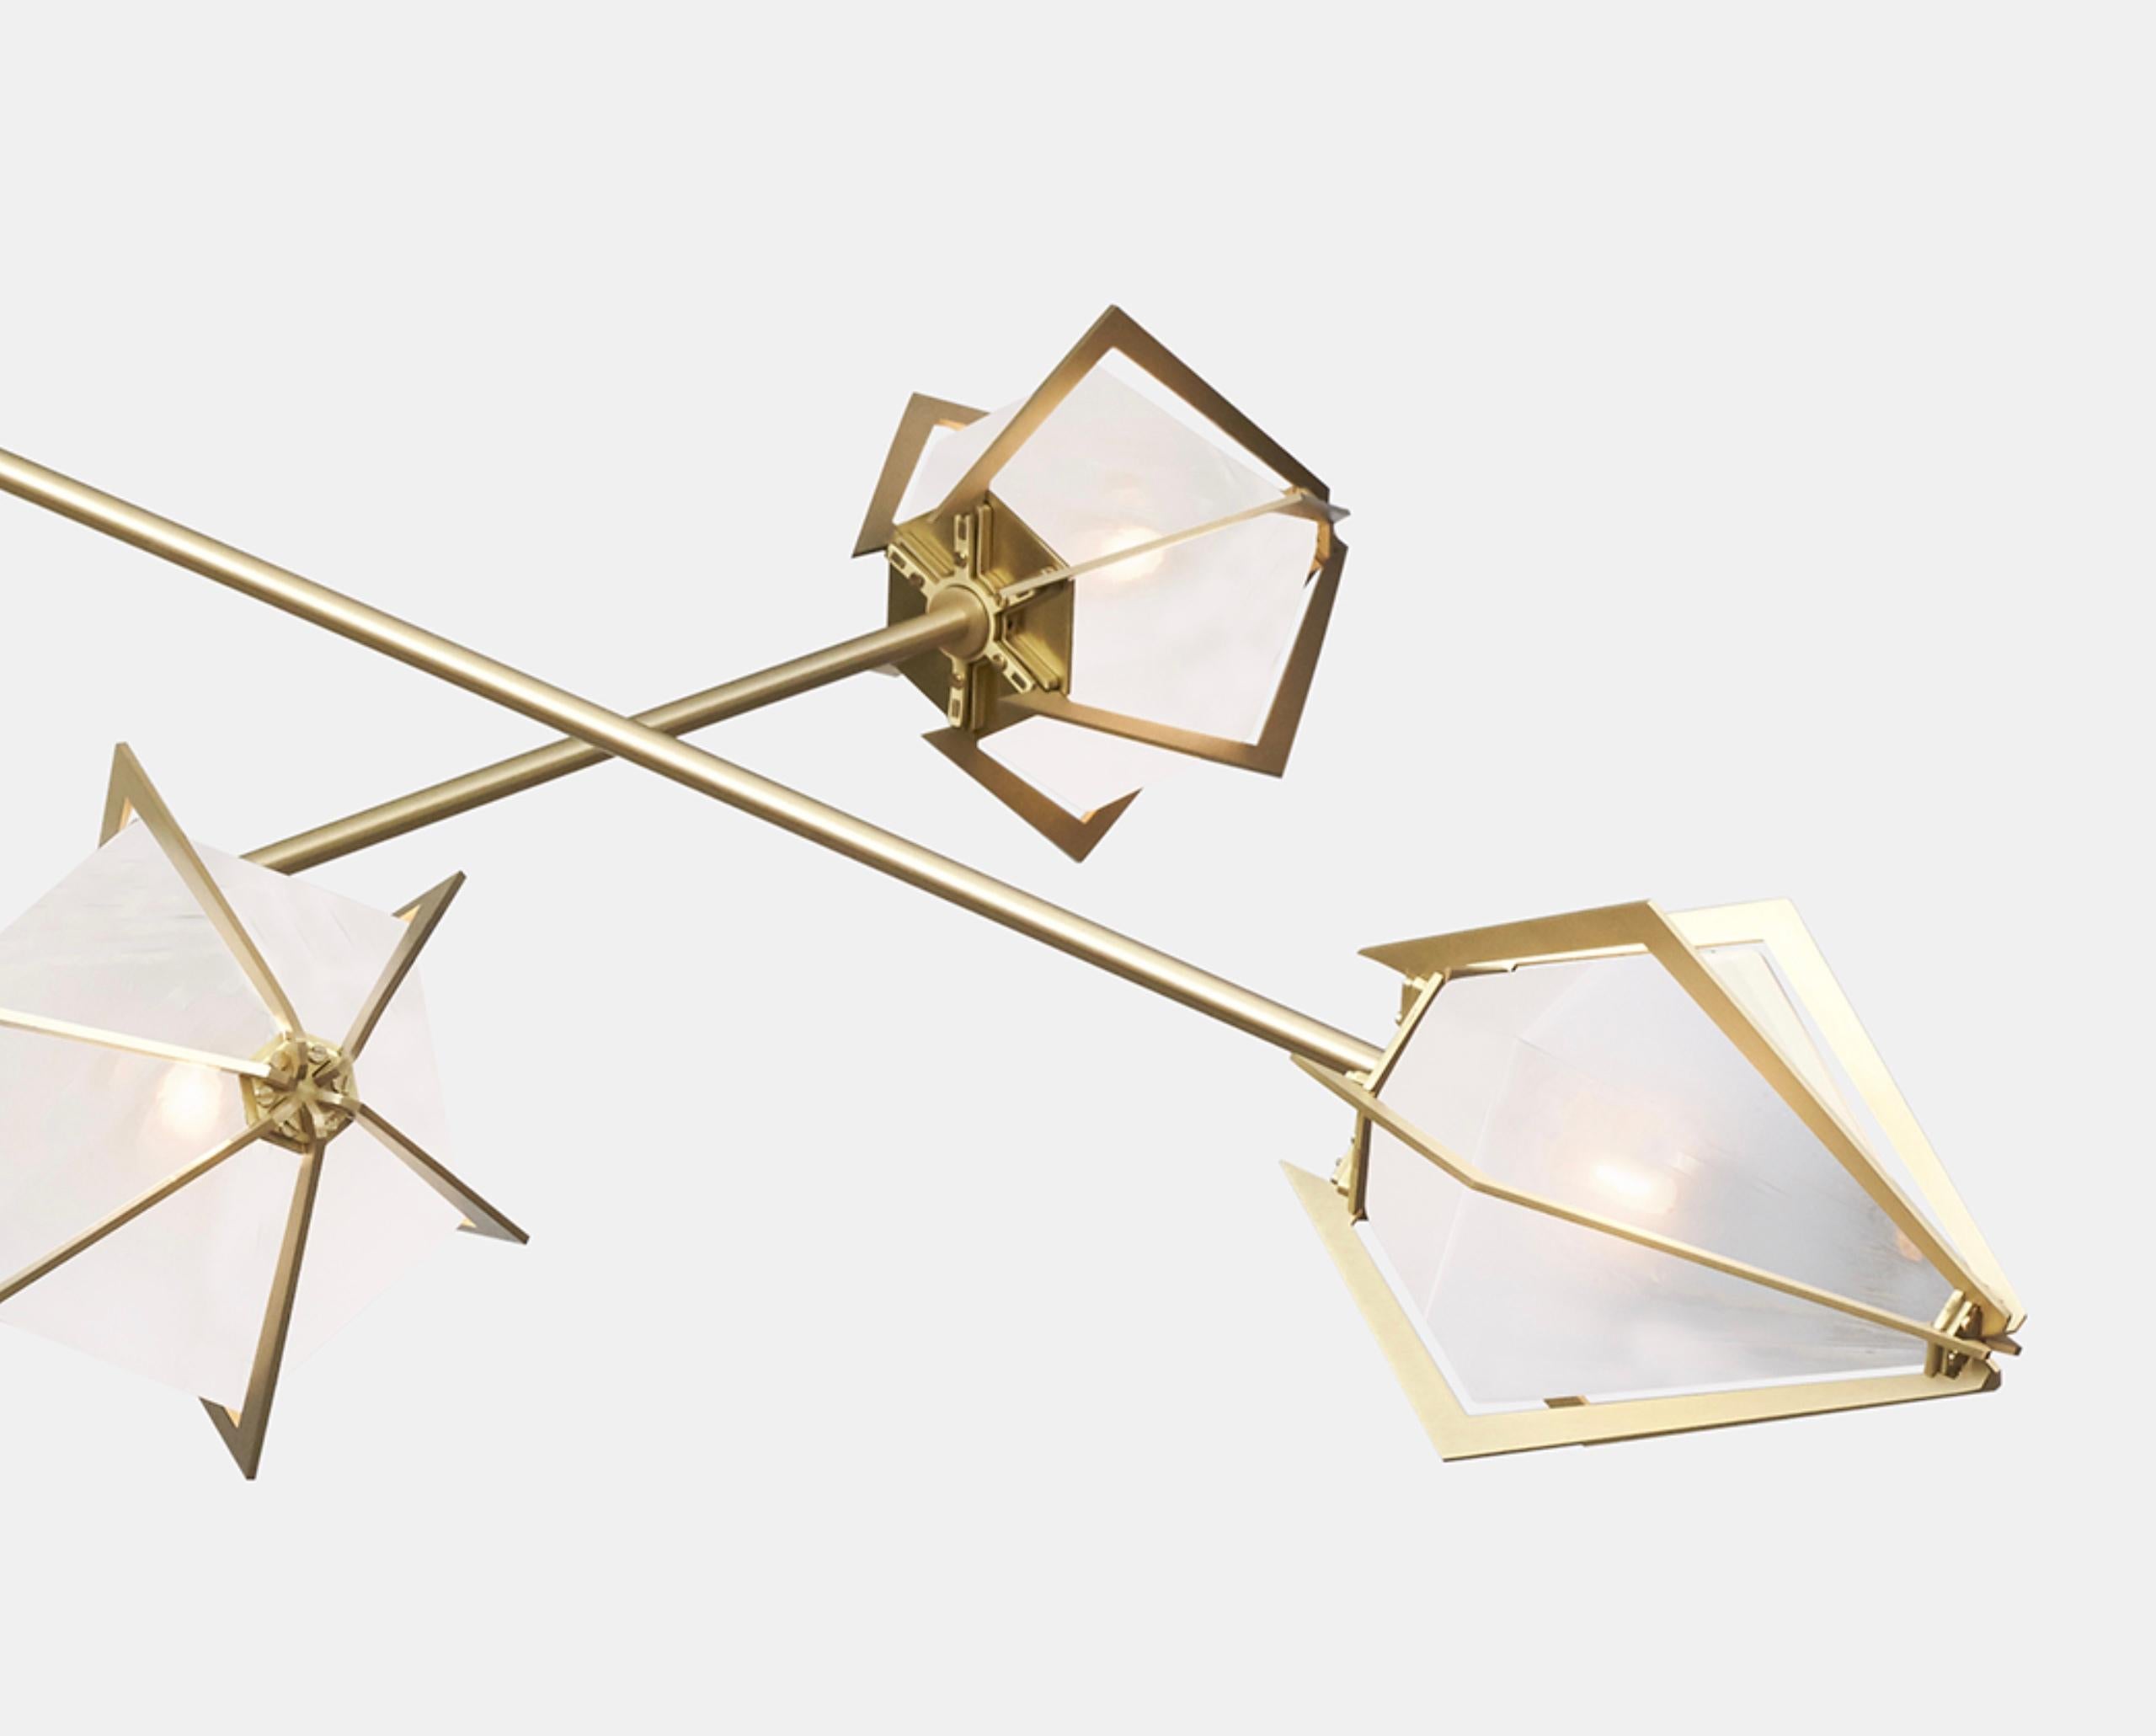 Canadian Harlow Spoke Chandelier Large in Satin Brass and Alabaster White Glass For Sale